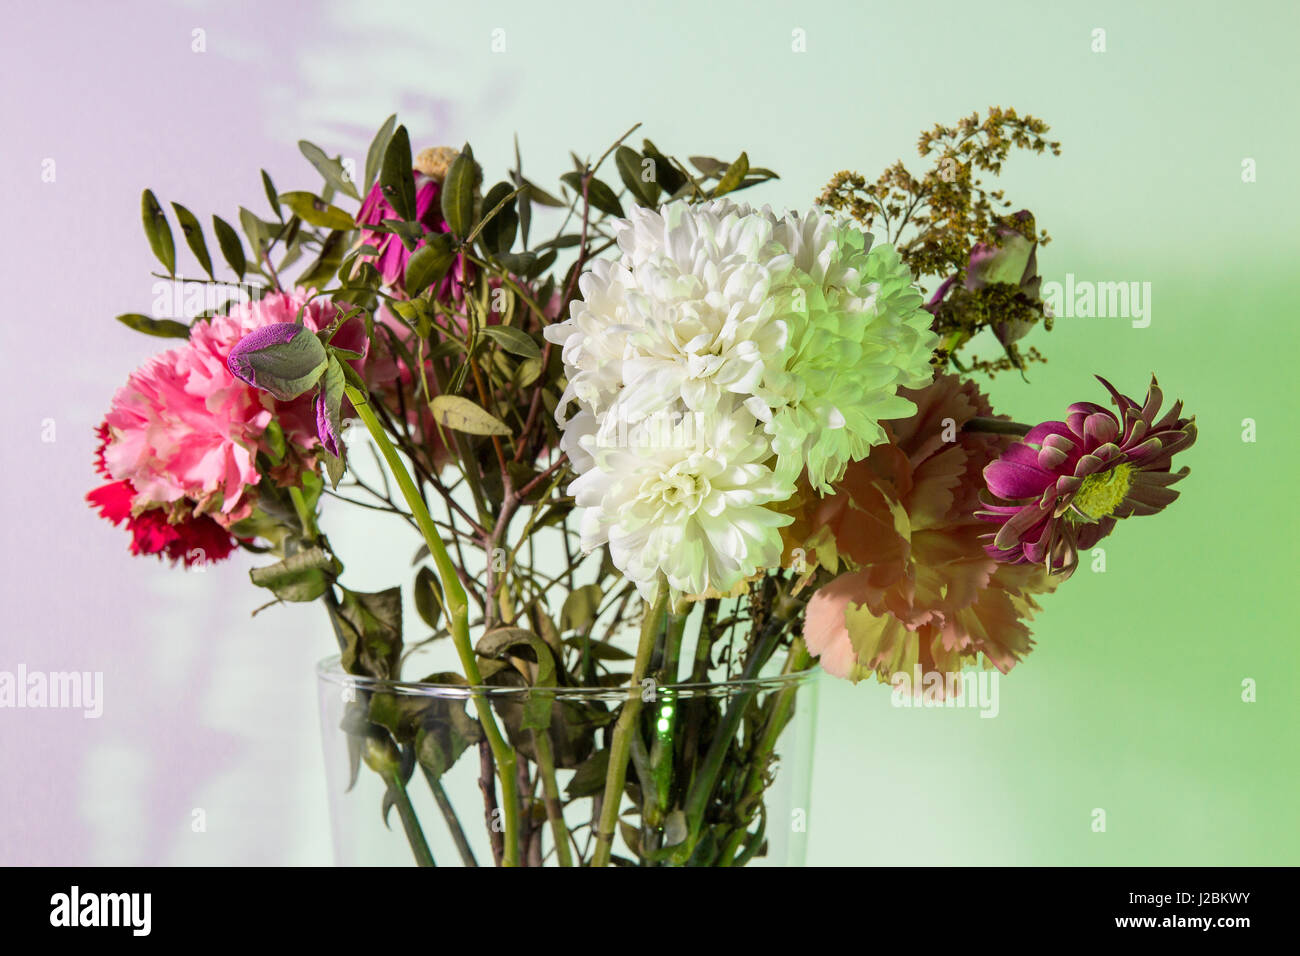 Flowers just starting to wilt in a transparent vase in front of a white wall colored green and purple using speedlights and gels. Stock Photo